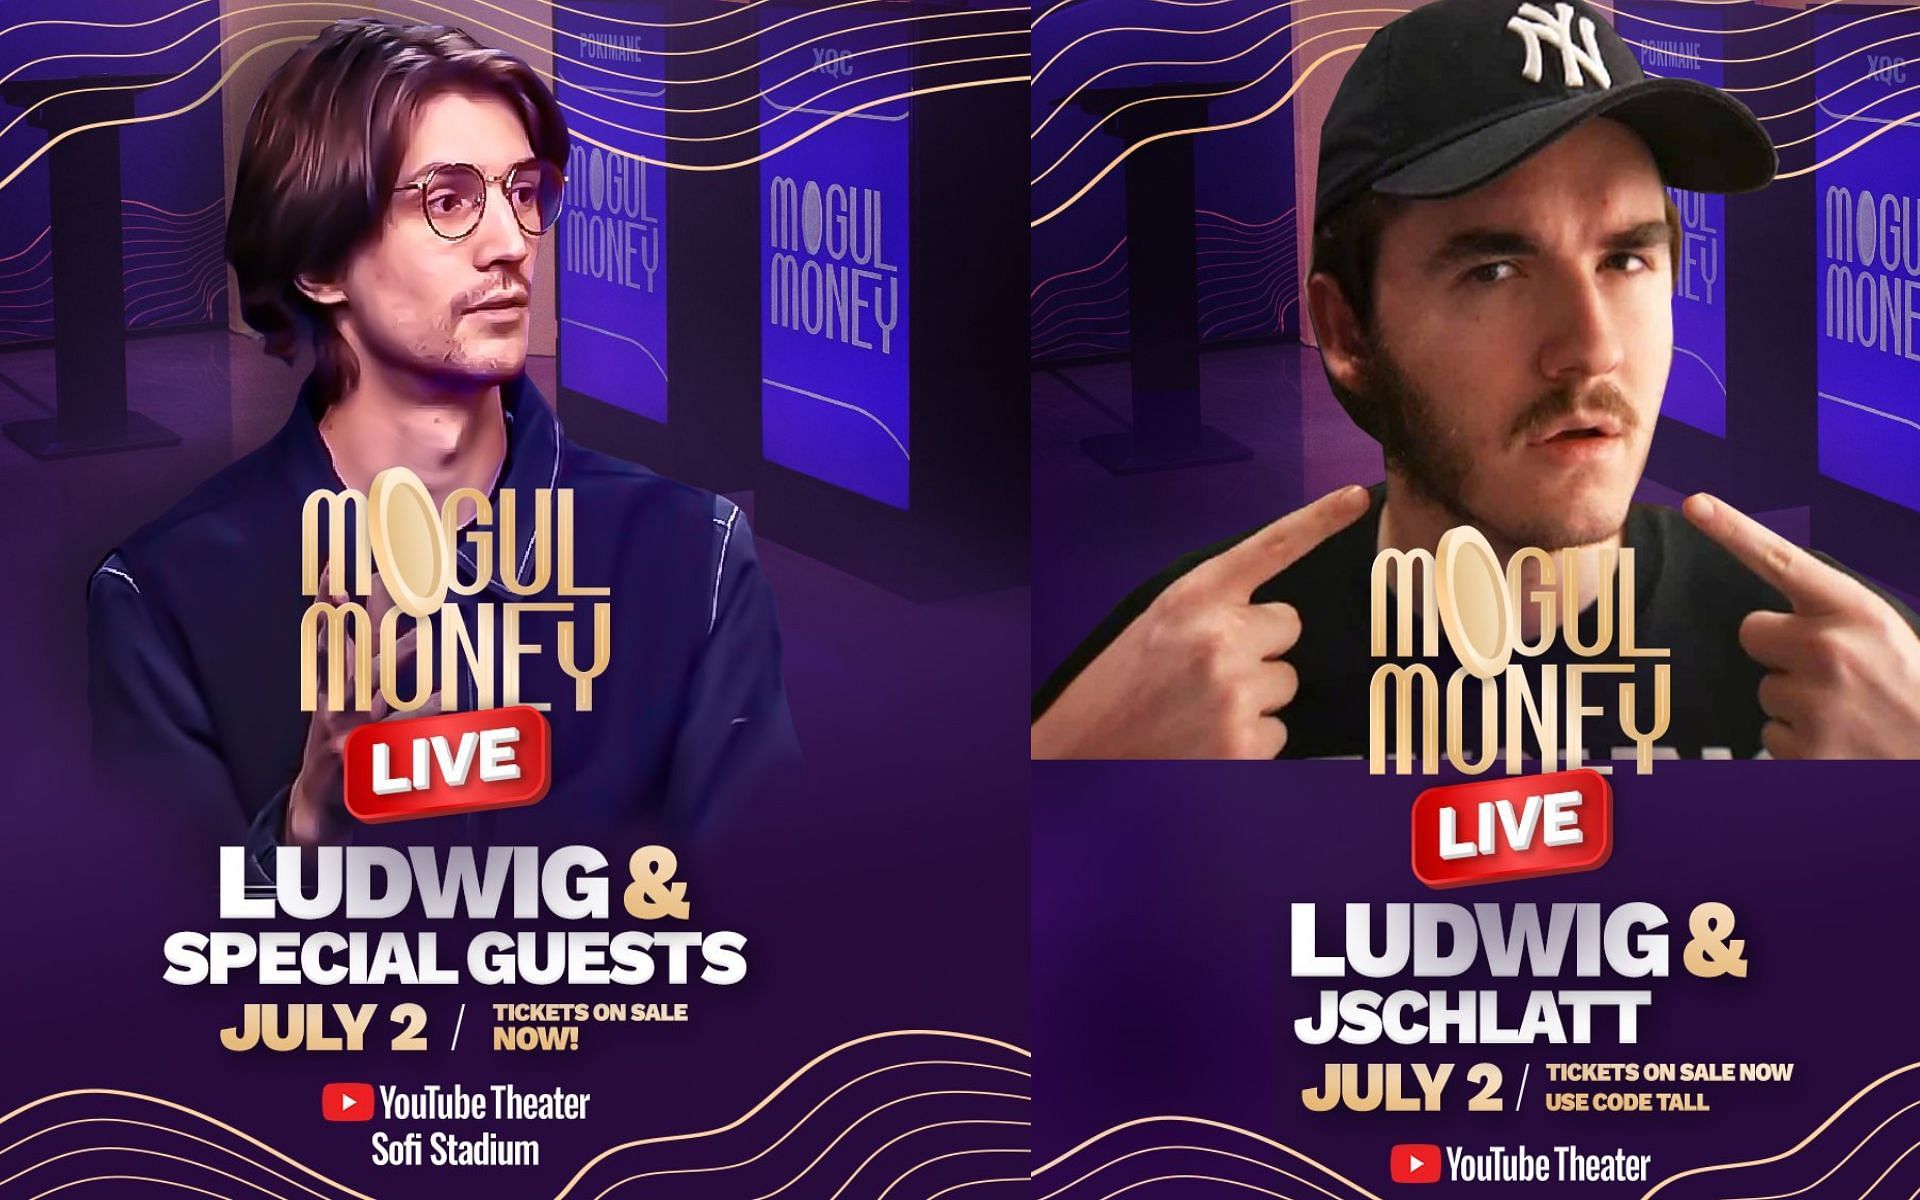 xQc and Jschlatt will be participating in the final episode of Mogul Money on July 2, 2022 (Image via LudwigAhgren/Twitter)